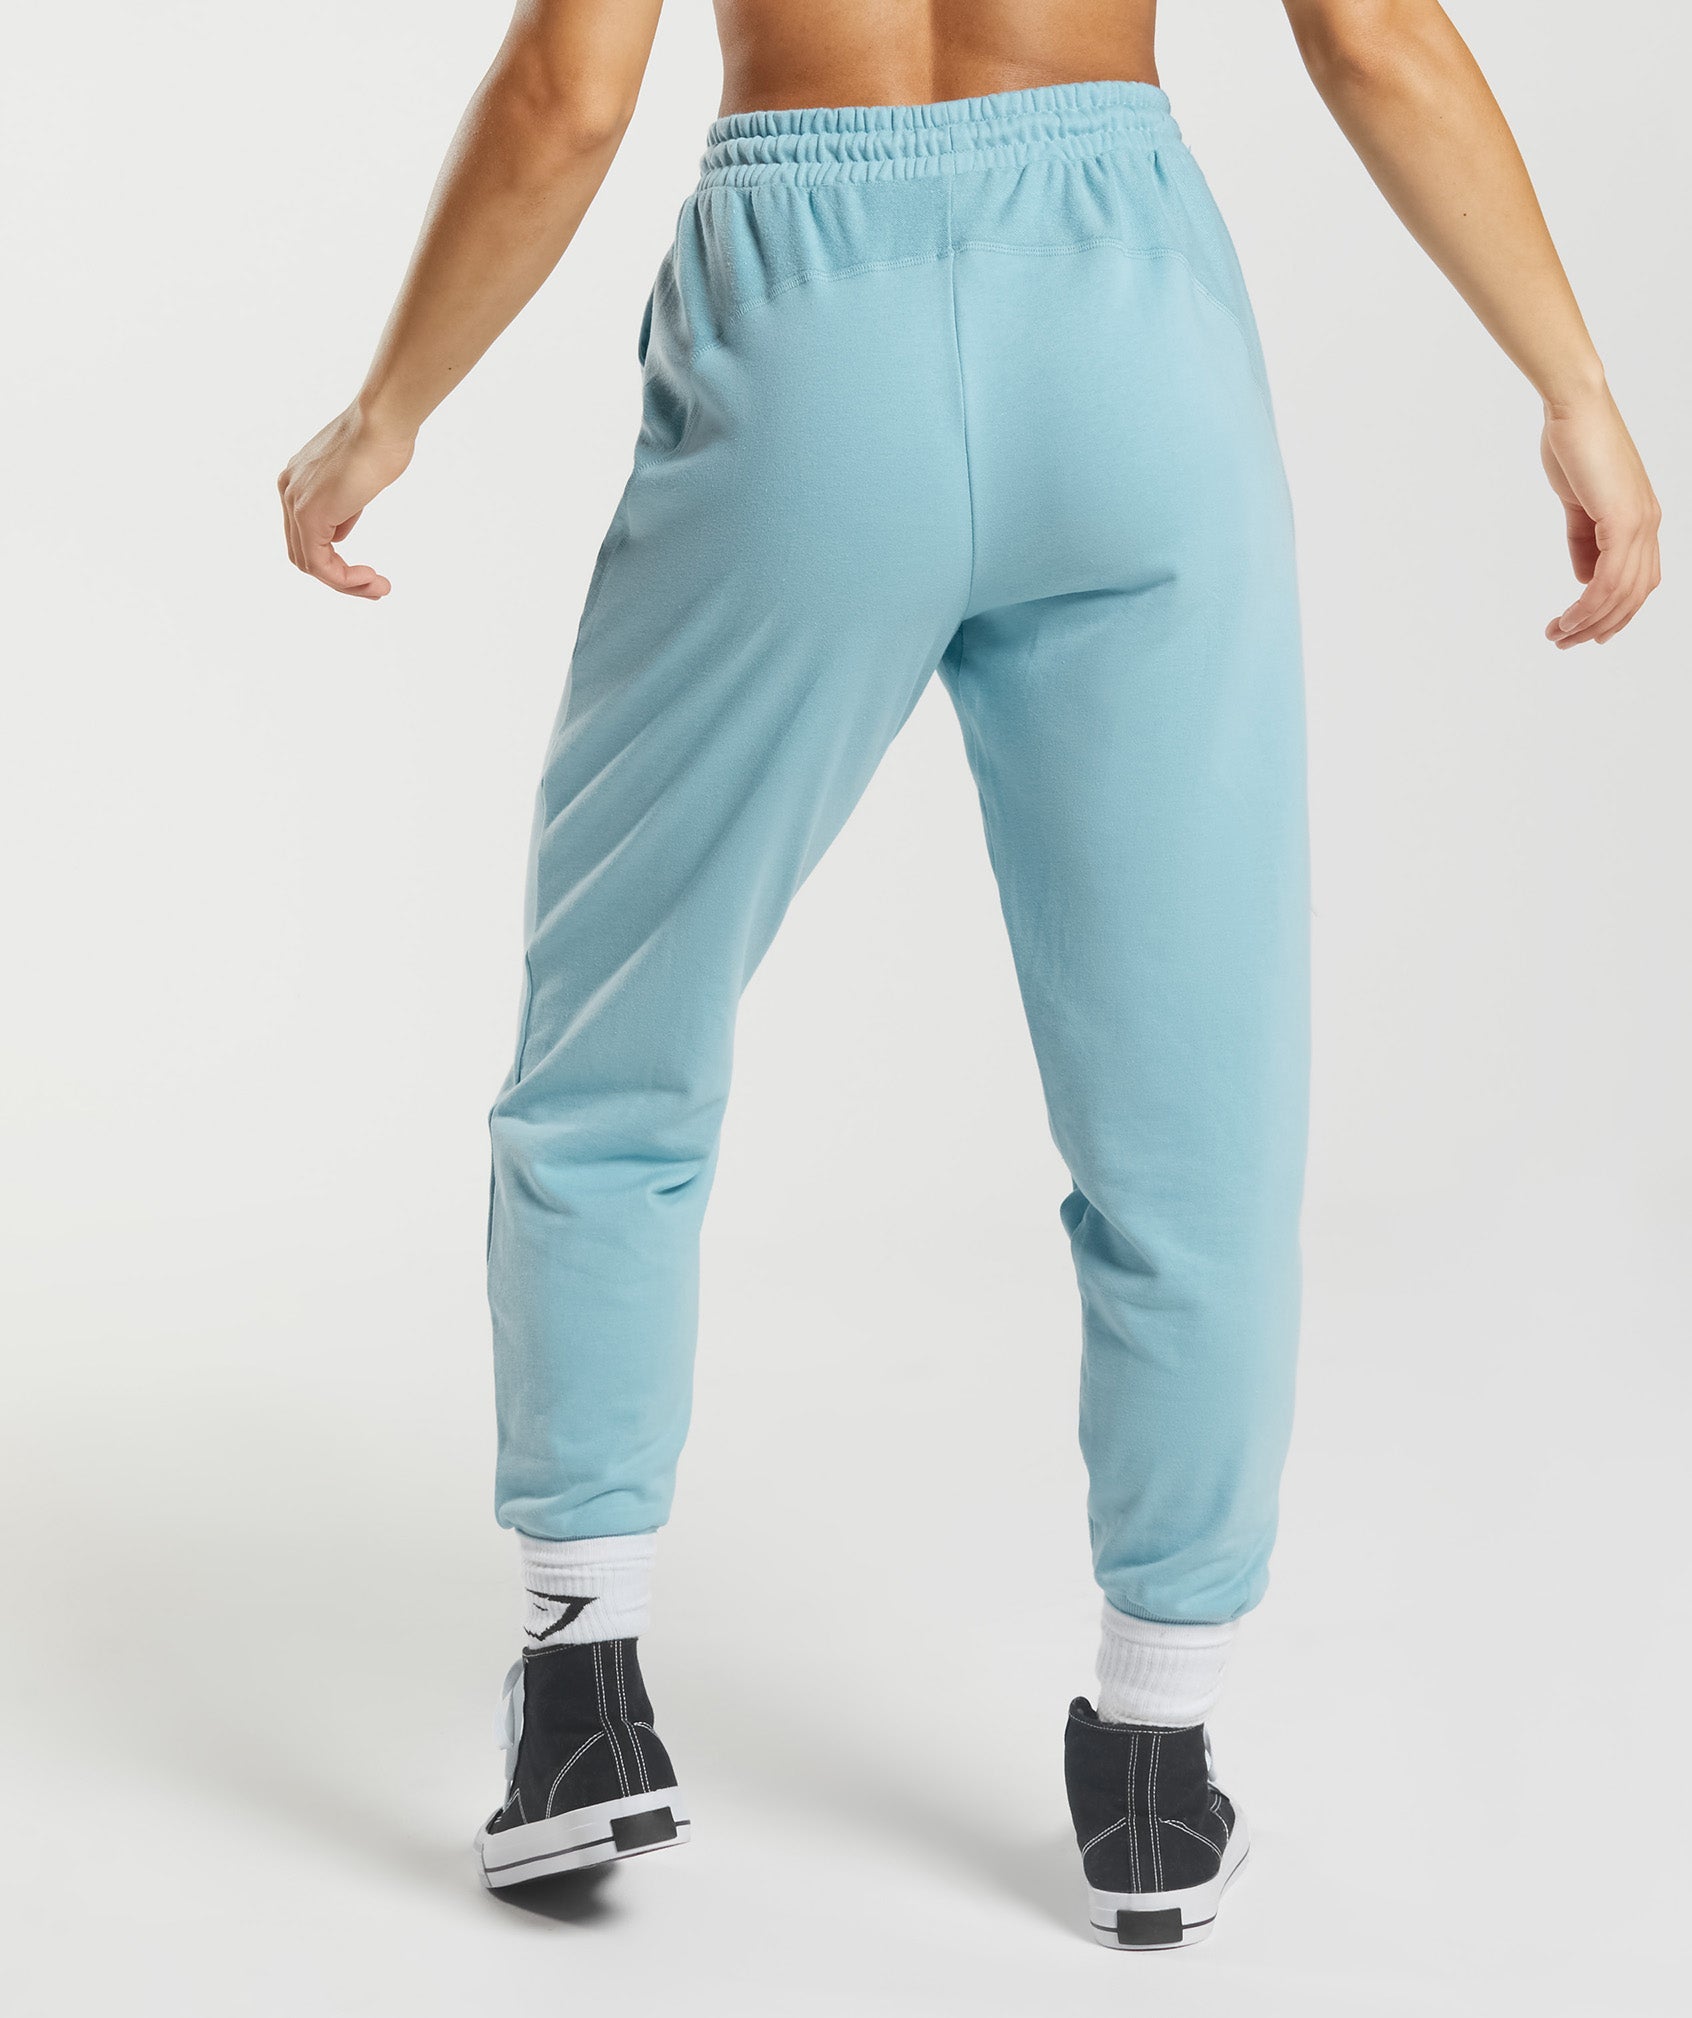 GS Power Joggers